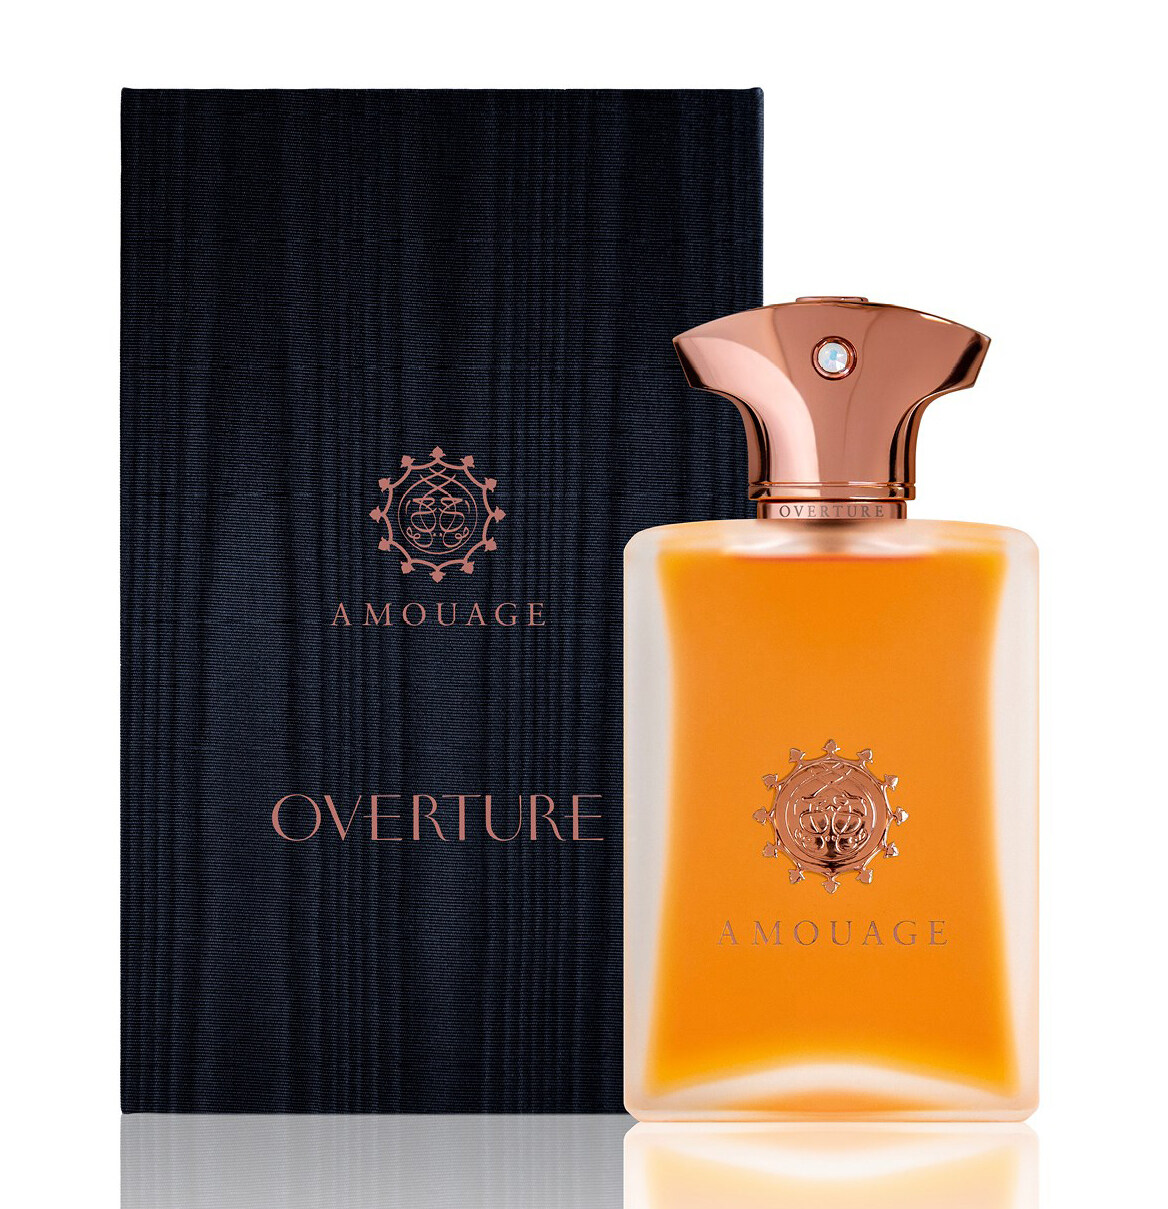 Overture Man by Amouage » Reviews & Perfume Facts